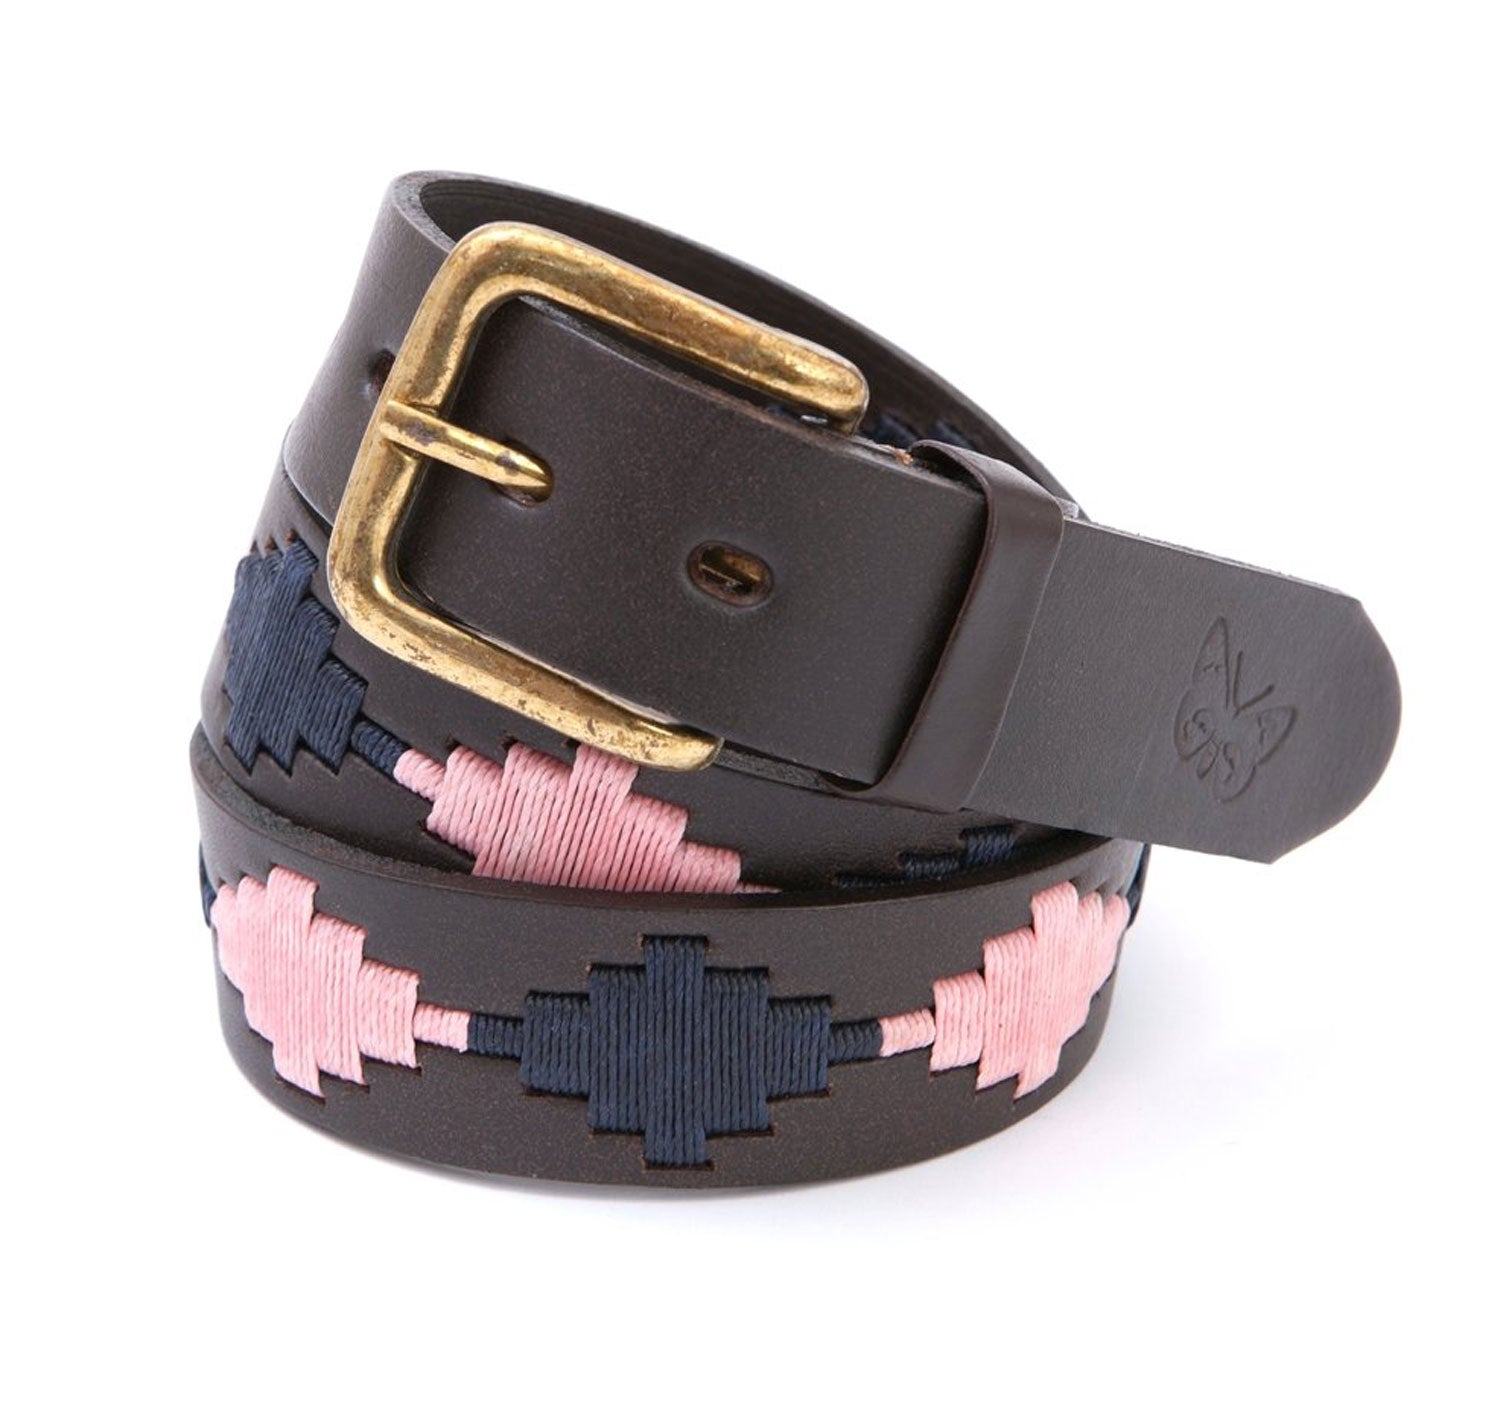 Regent - Polo Belt - Embroidered - Leather - Pink and Navy - Regent Tailoring